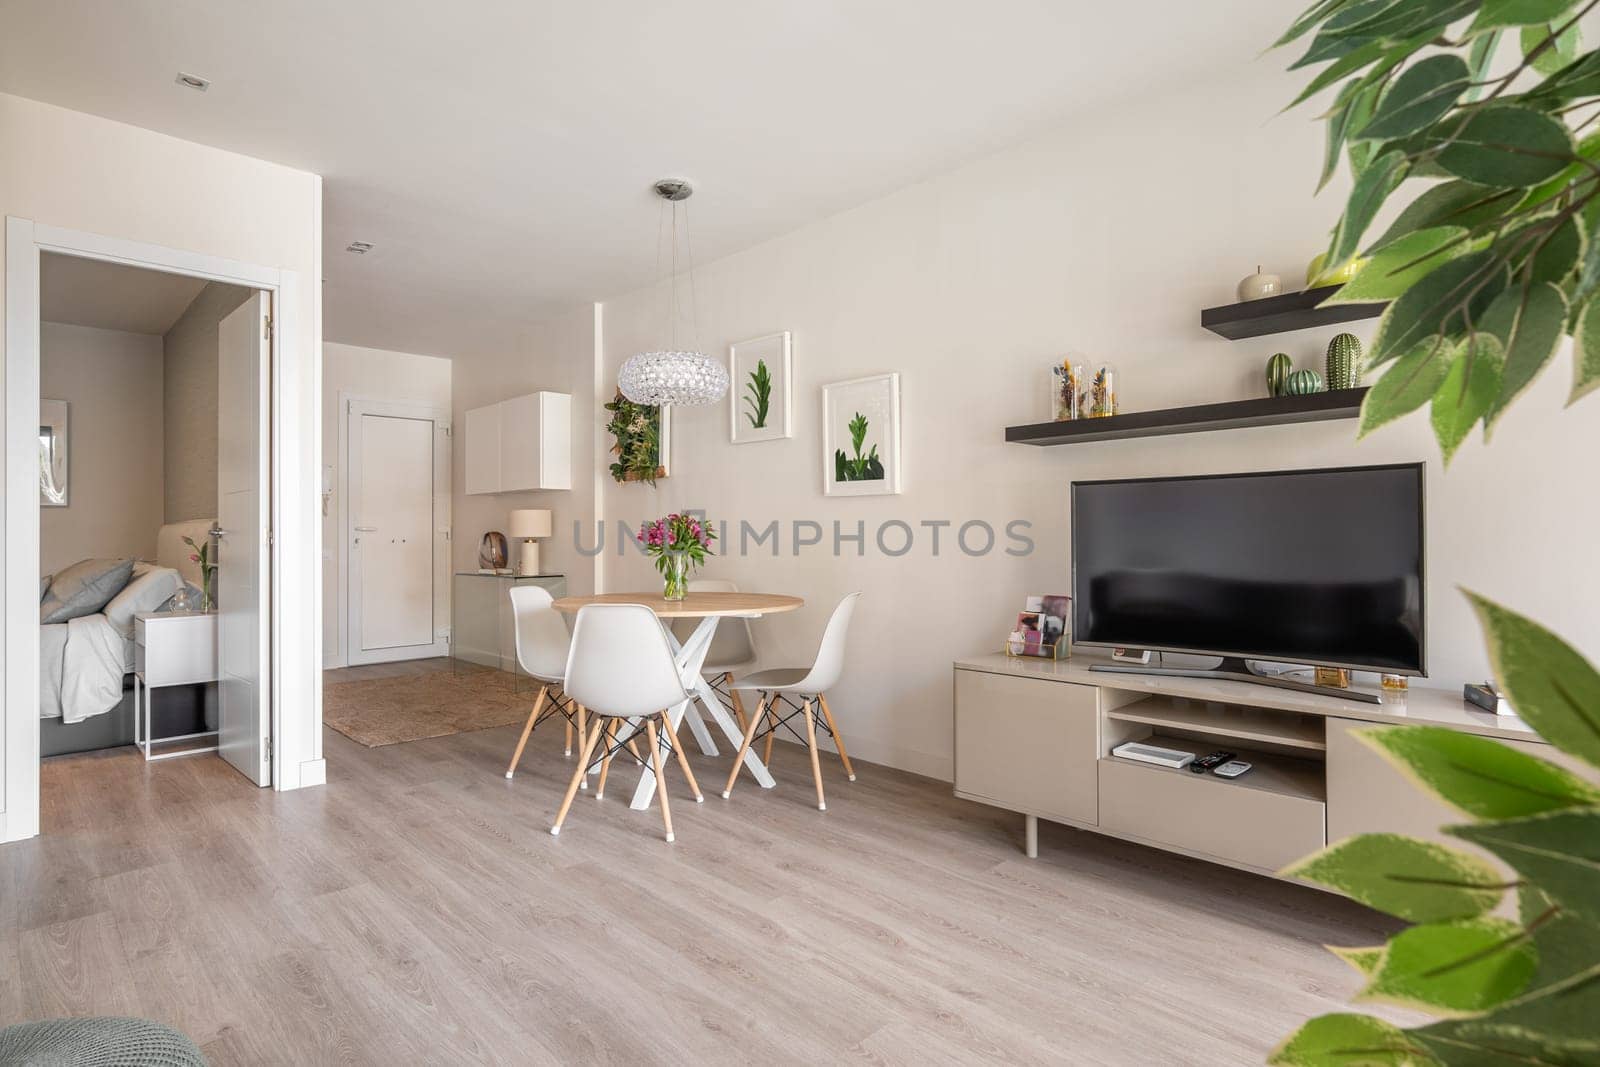 Modern interior in compact apartment with a spacious combined living room with table, chairs and TV and decorative accessories overlooking the bedroom and bathroom. Stylish city real estate concept.